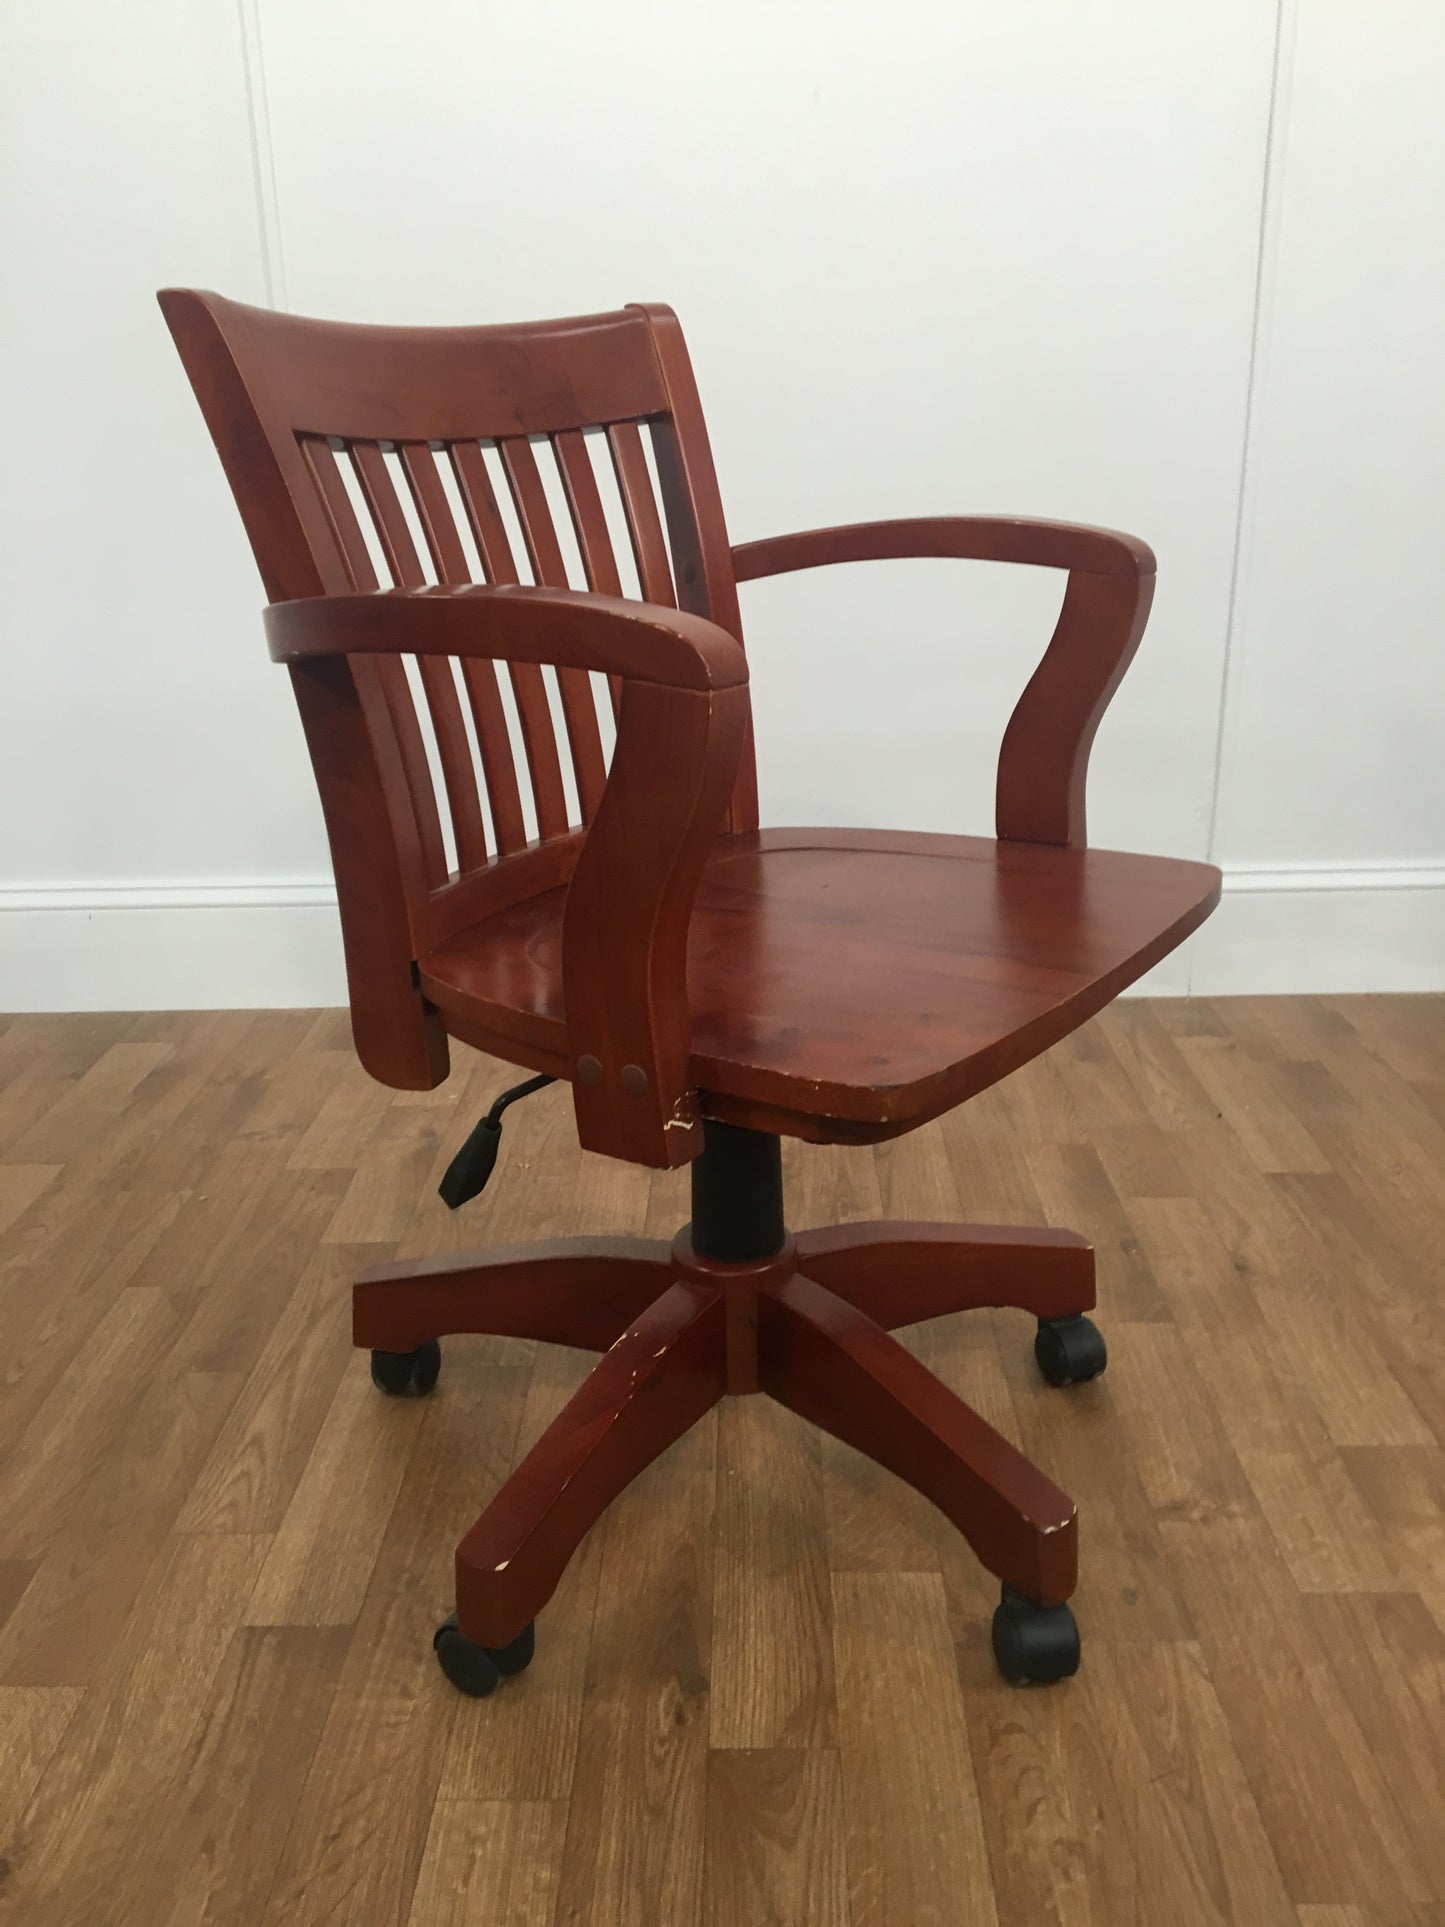 CHERRY WOOD OFFICE SWIVEL CHAIR, SLATTED BACK AND ROLLERS